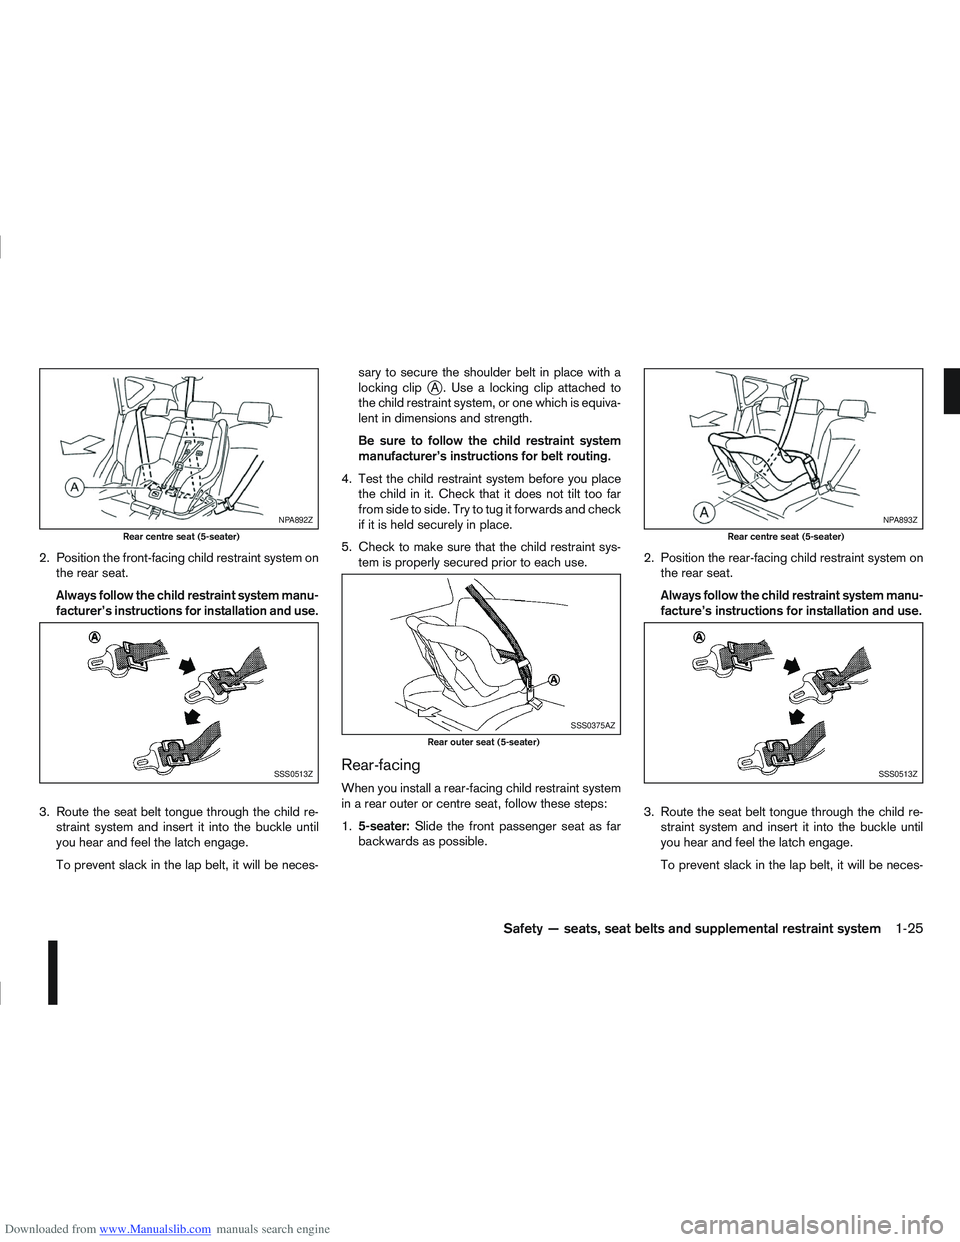 NISSAN QASHQAI 2007 Service Manual Downloaded from www.Manualslib.com manuals search engine 2. Position the front-facing child restraint system onthe rear seat.
Always follow the child restraint system manu-
facturer’s instructions f